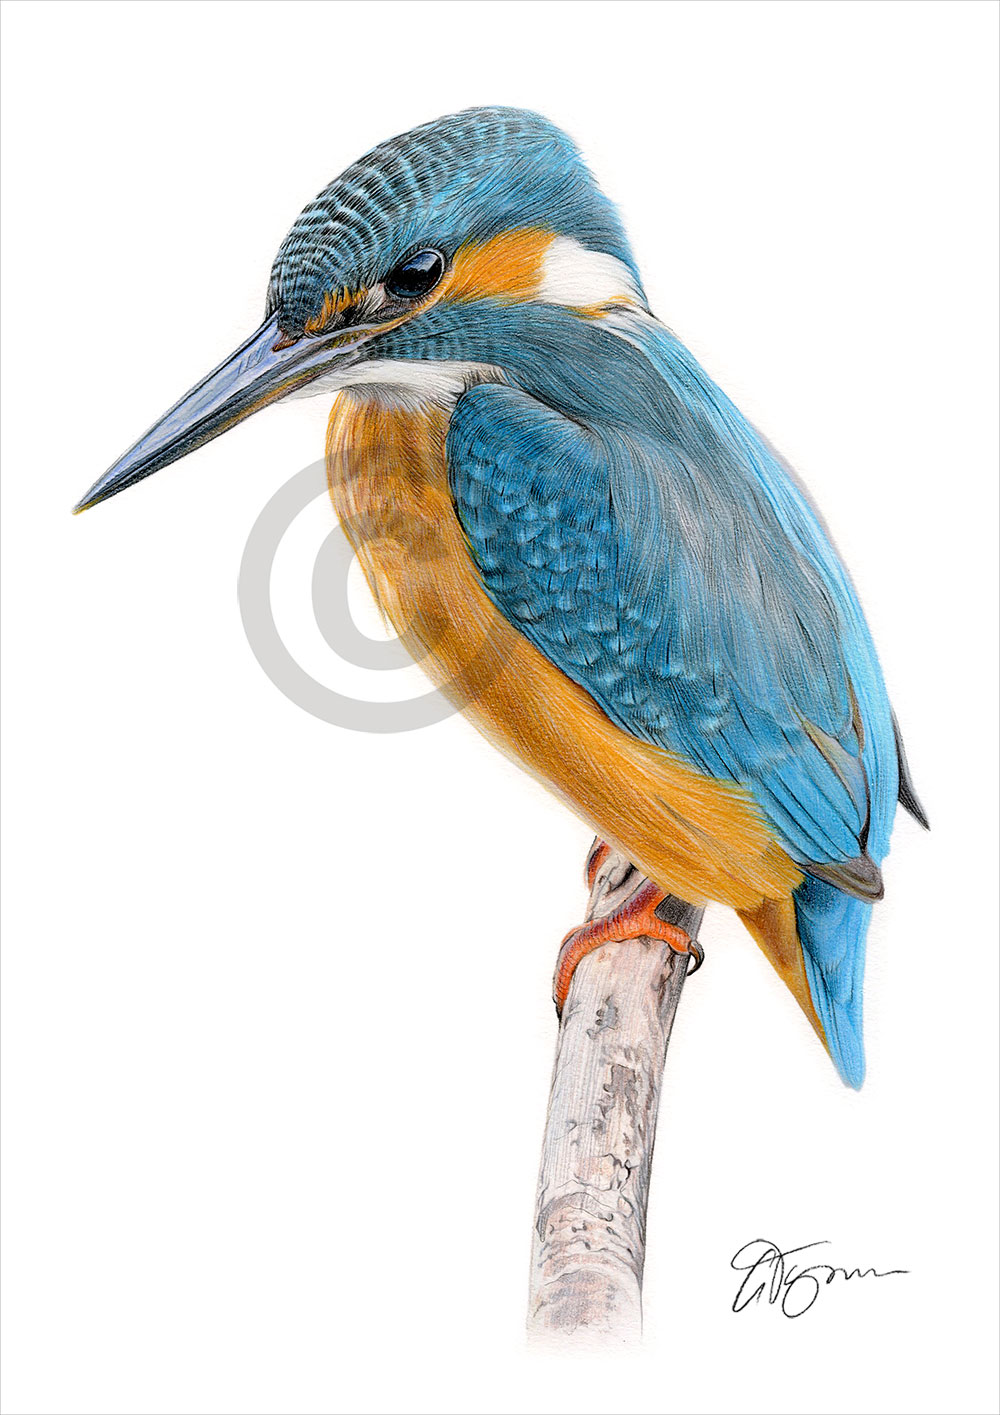 Colour pencil drawing of a Kingfisher by artist Gary Tymon